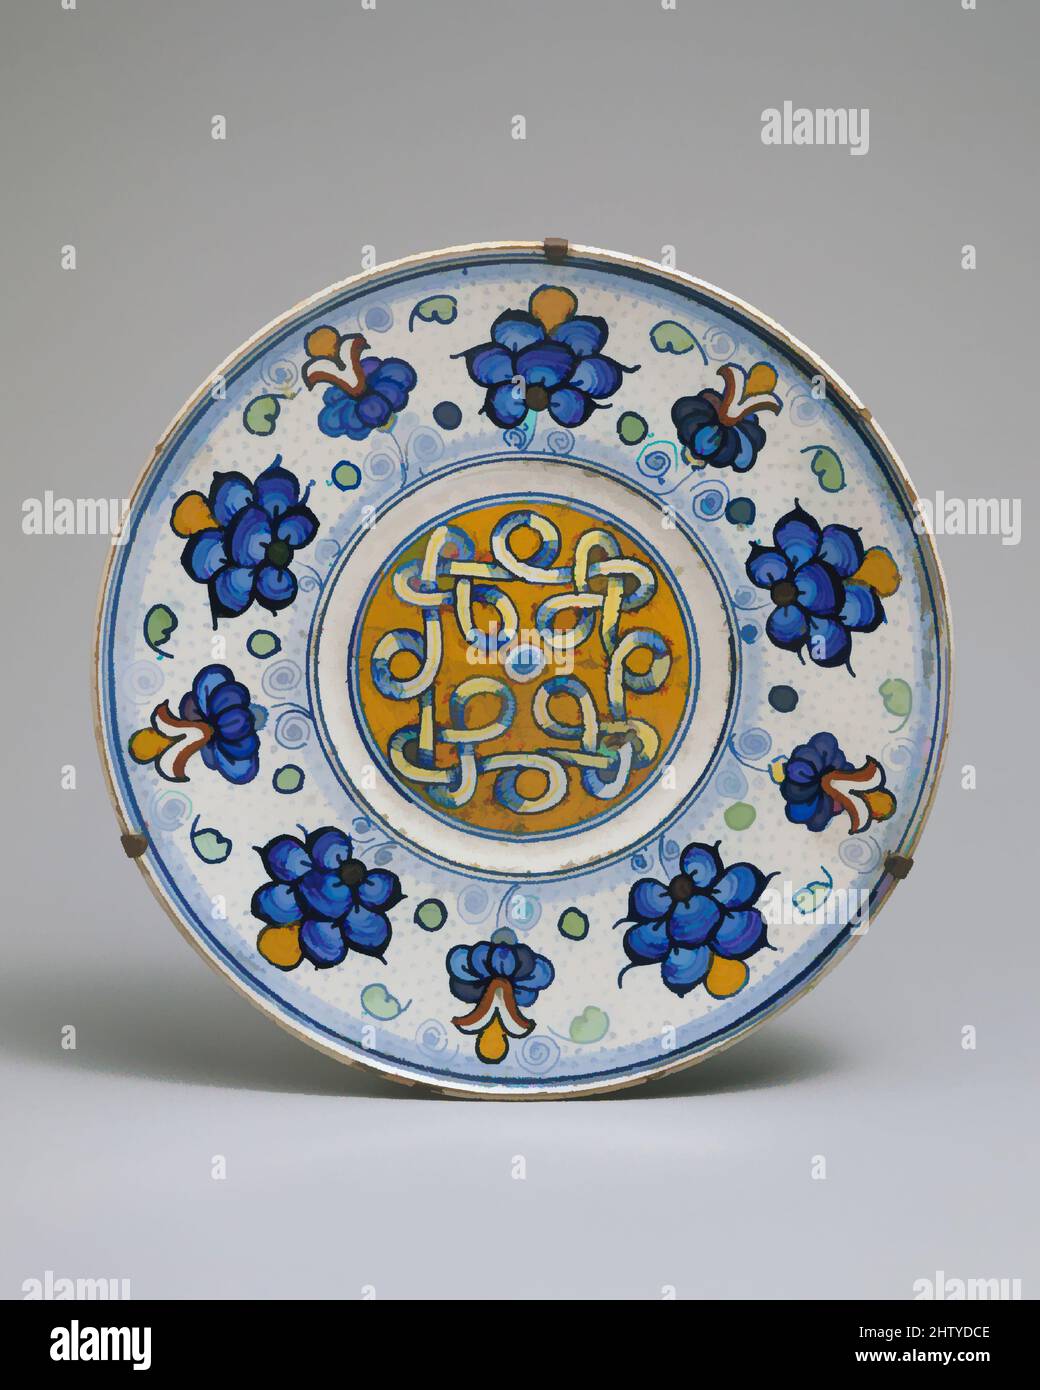 Art inspired by Maiolica: Plate (tagliere), ca. 1500, Italian (Tuscany?), Maiolica (tin-glazed earthenware), Diameter: 23.3cm (9 3/16 in.), Ceramics-Pottery, Classic works modernized by Artotop with a splash of modernity. Shapes, color and value, eye-catching visual impact on art. Emotions through freedom of artworks in a contemporary way. A timeless message pursuing a wildly creative new direction. Artists turning to the digital medium and creating the Artotop NFT Stock Photo